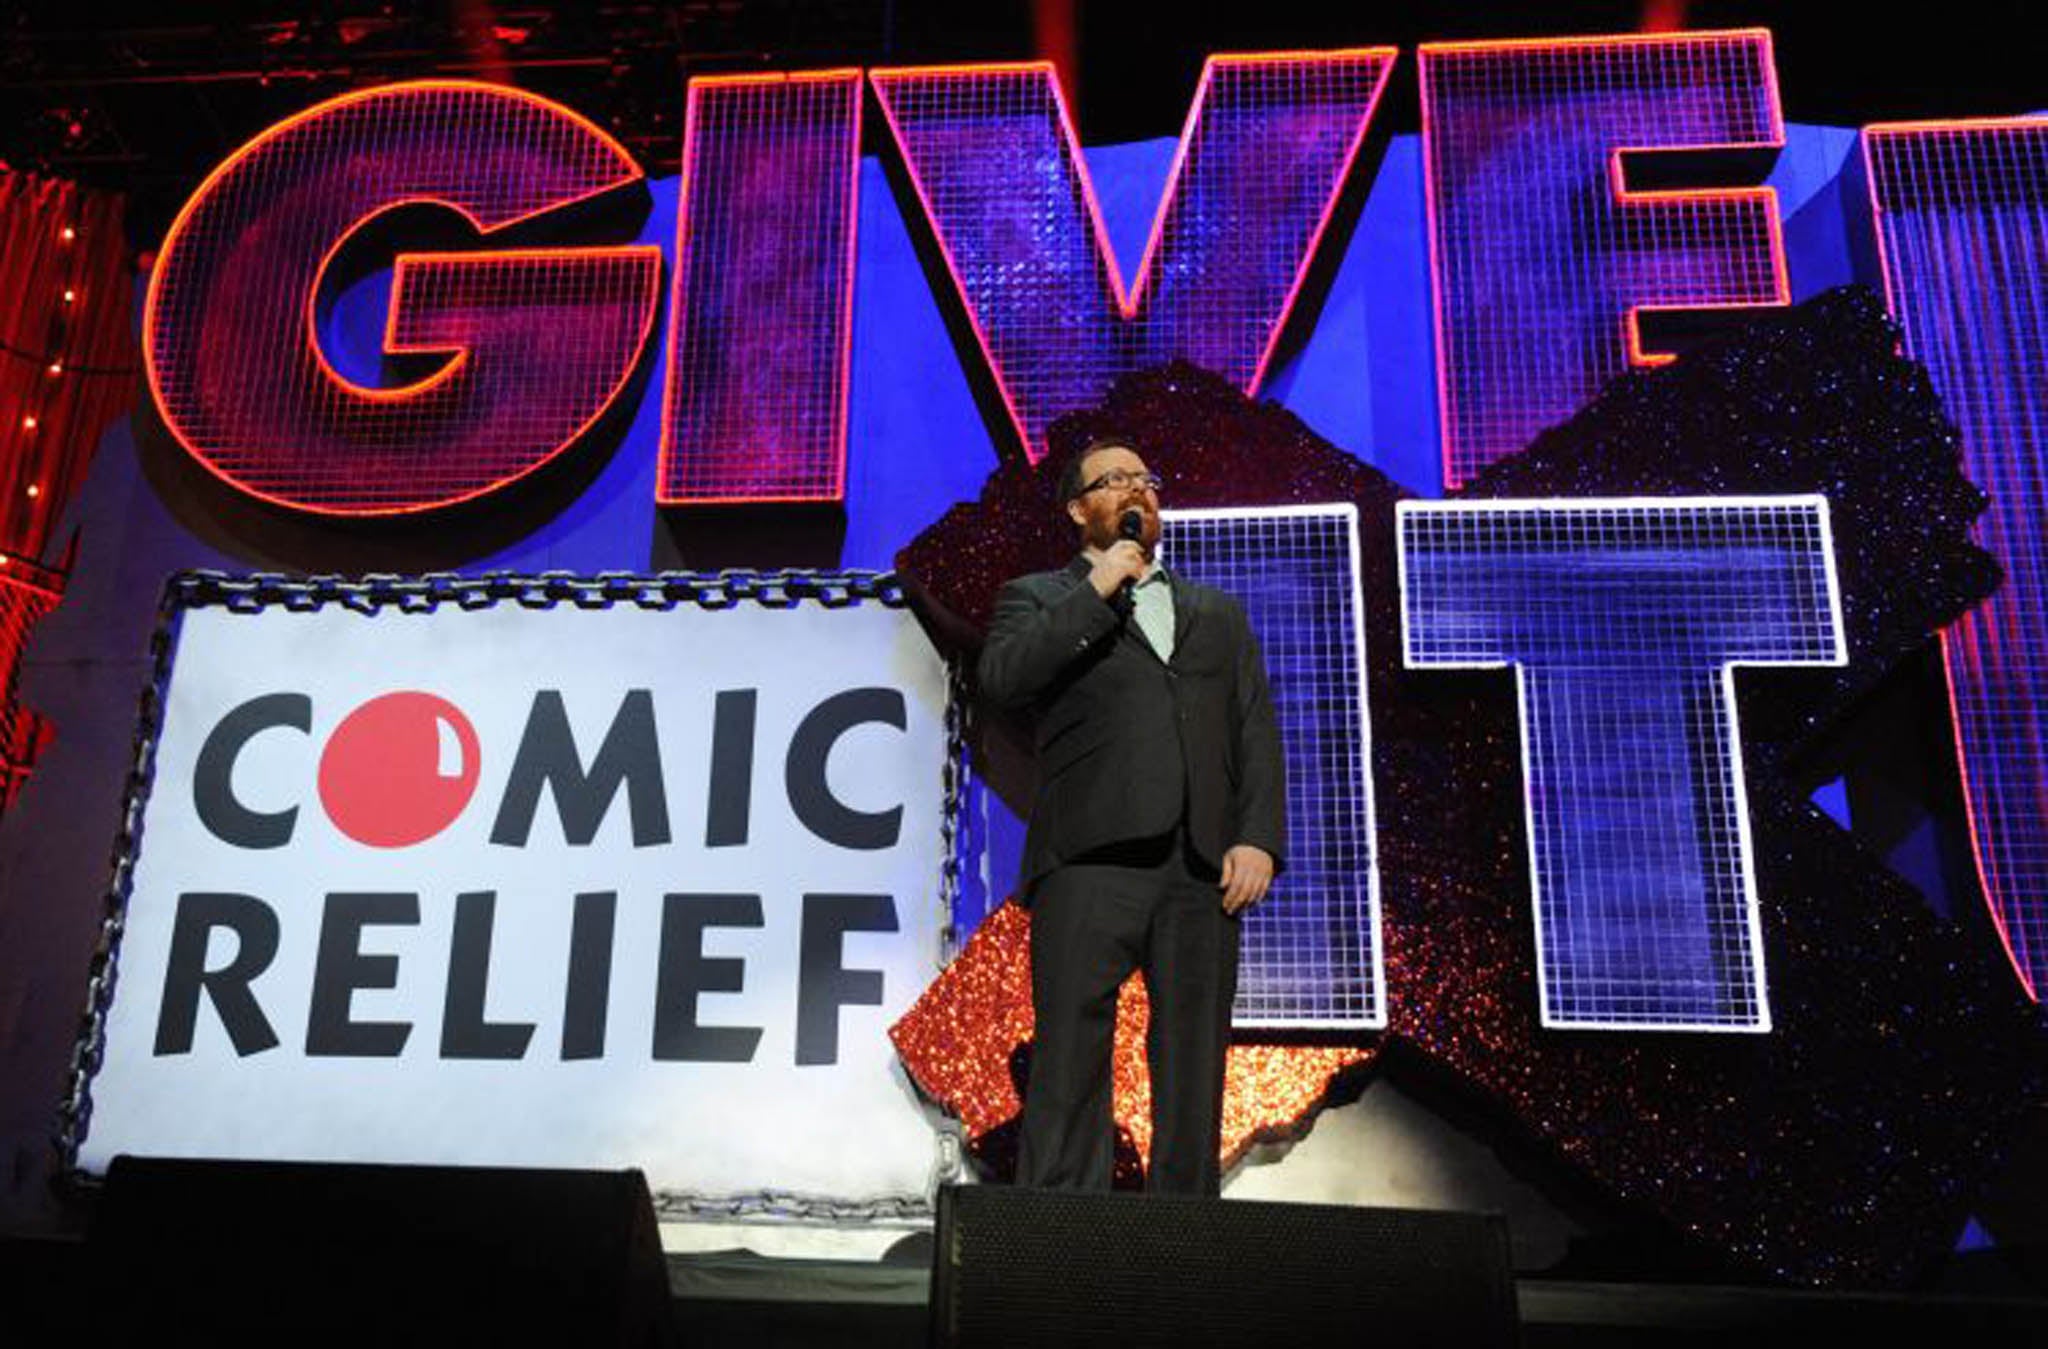 Frankie Boyle performing at Give It Up for Comic Relief